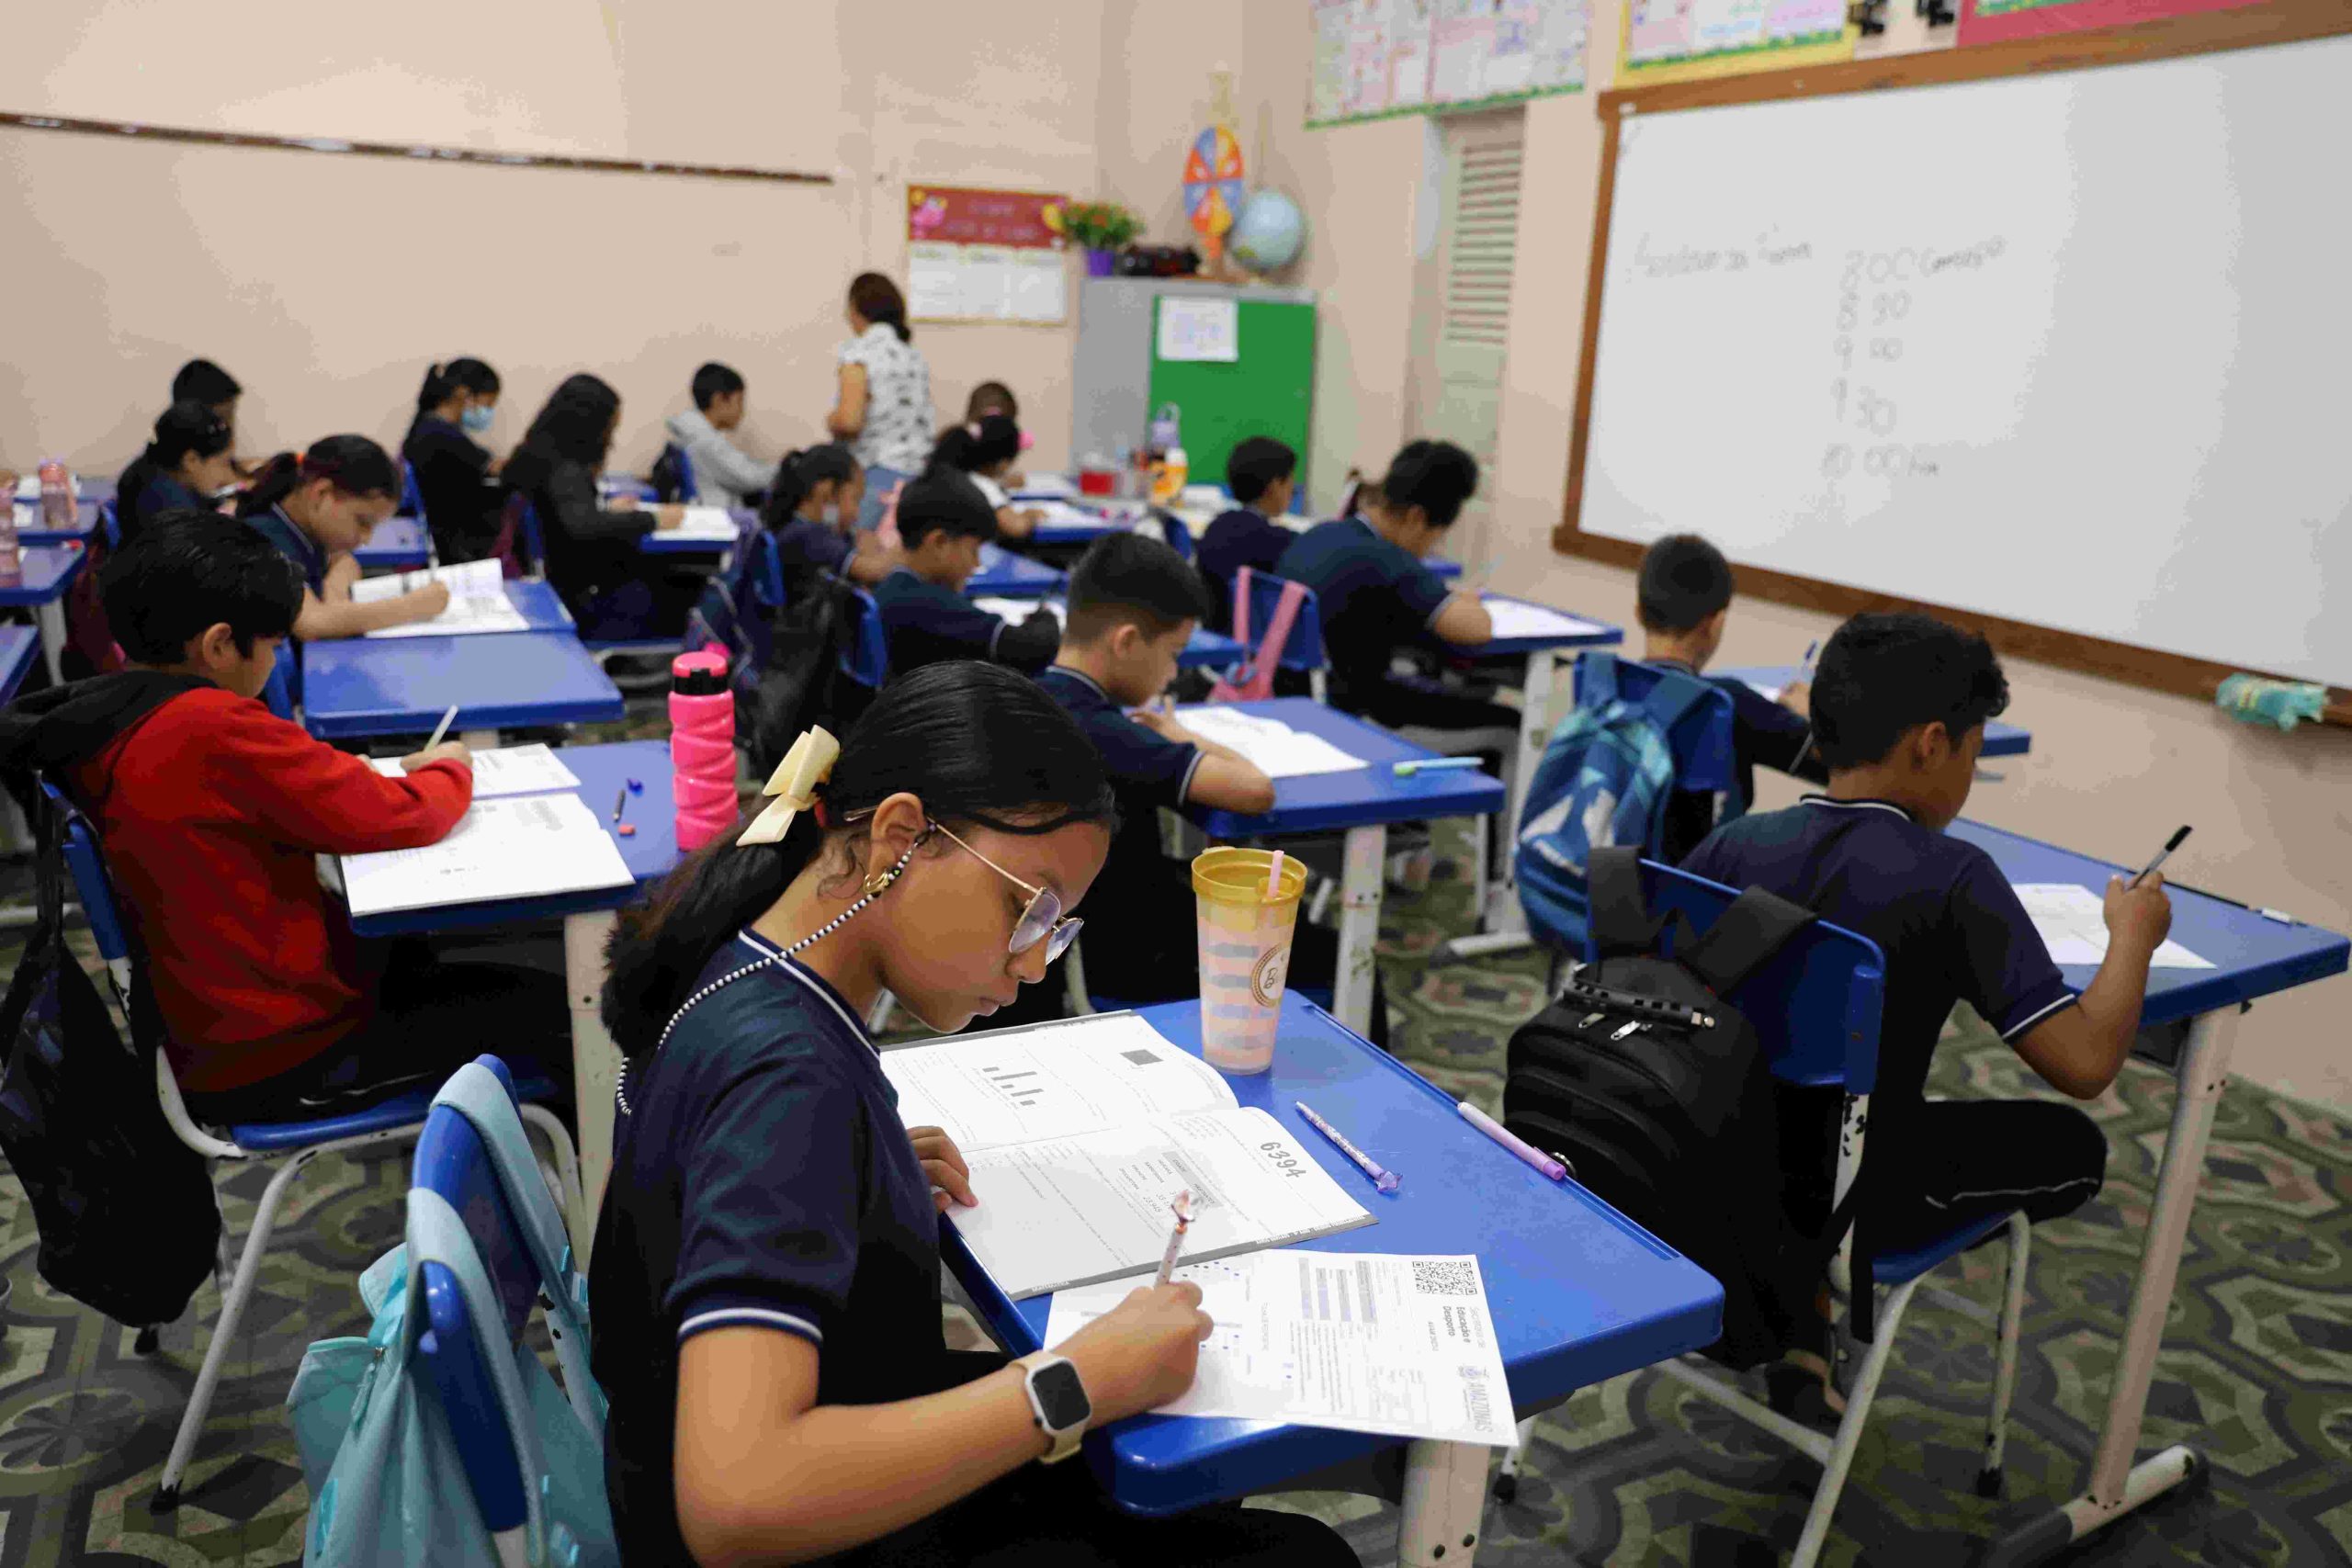 More than 133 thousand public school students participate in Learning Assessment